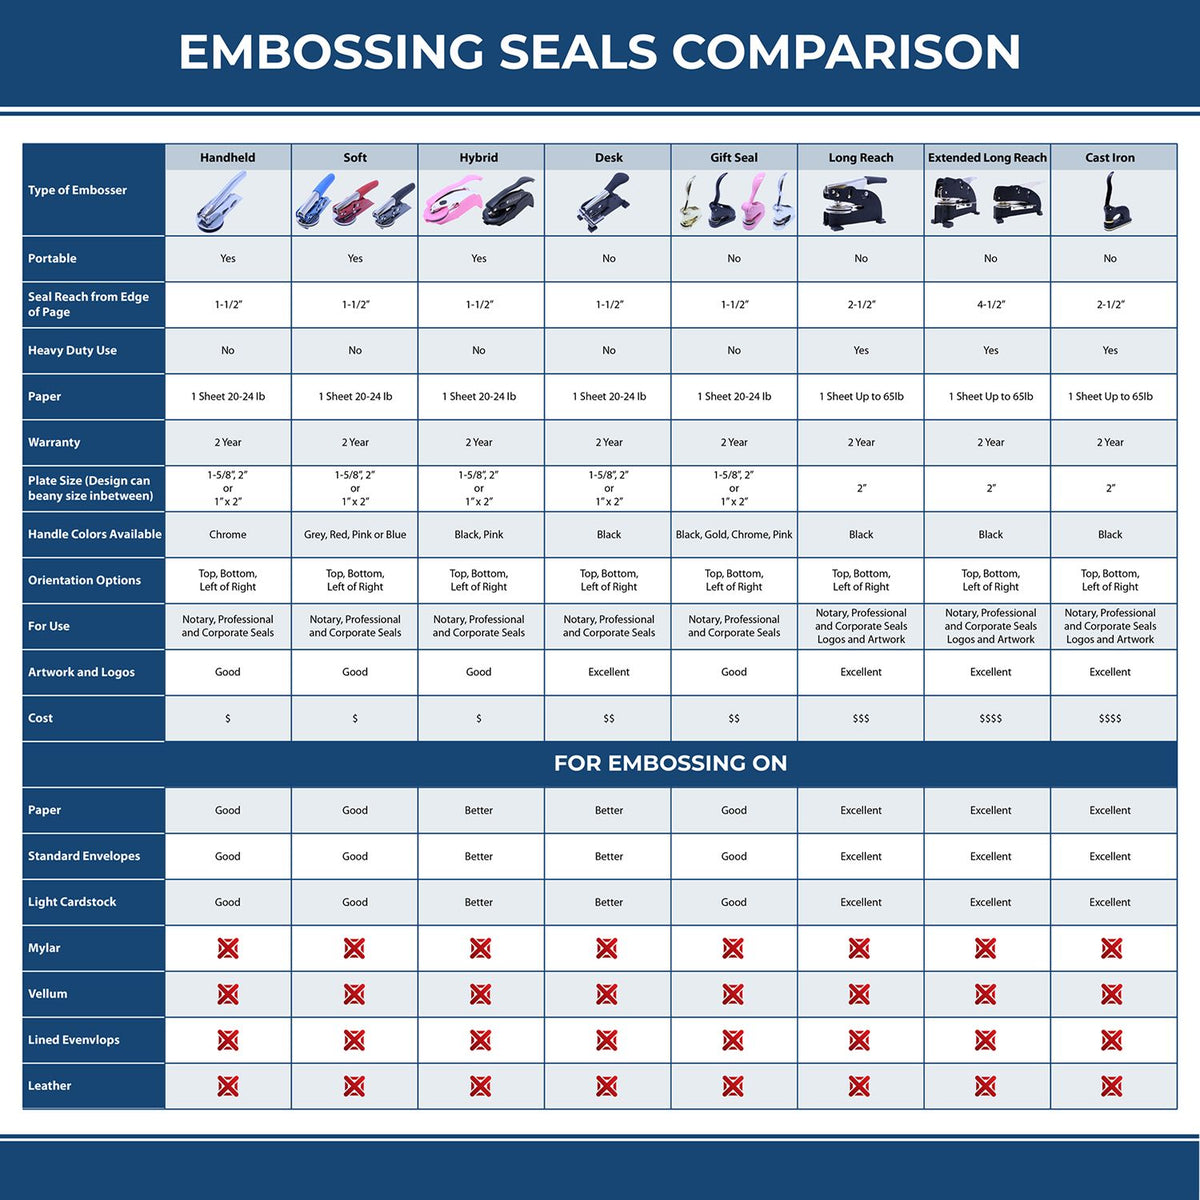 A comparison chart for the different types of mount models available for the Handheld Florida Professional Engineer Embosser.